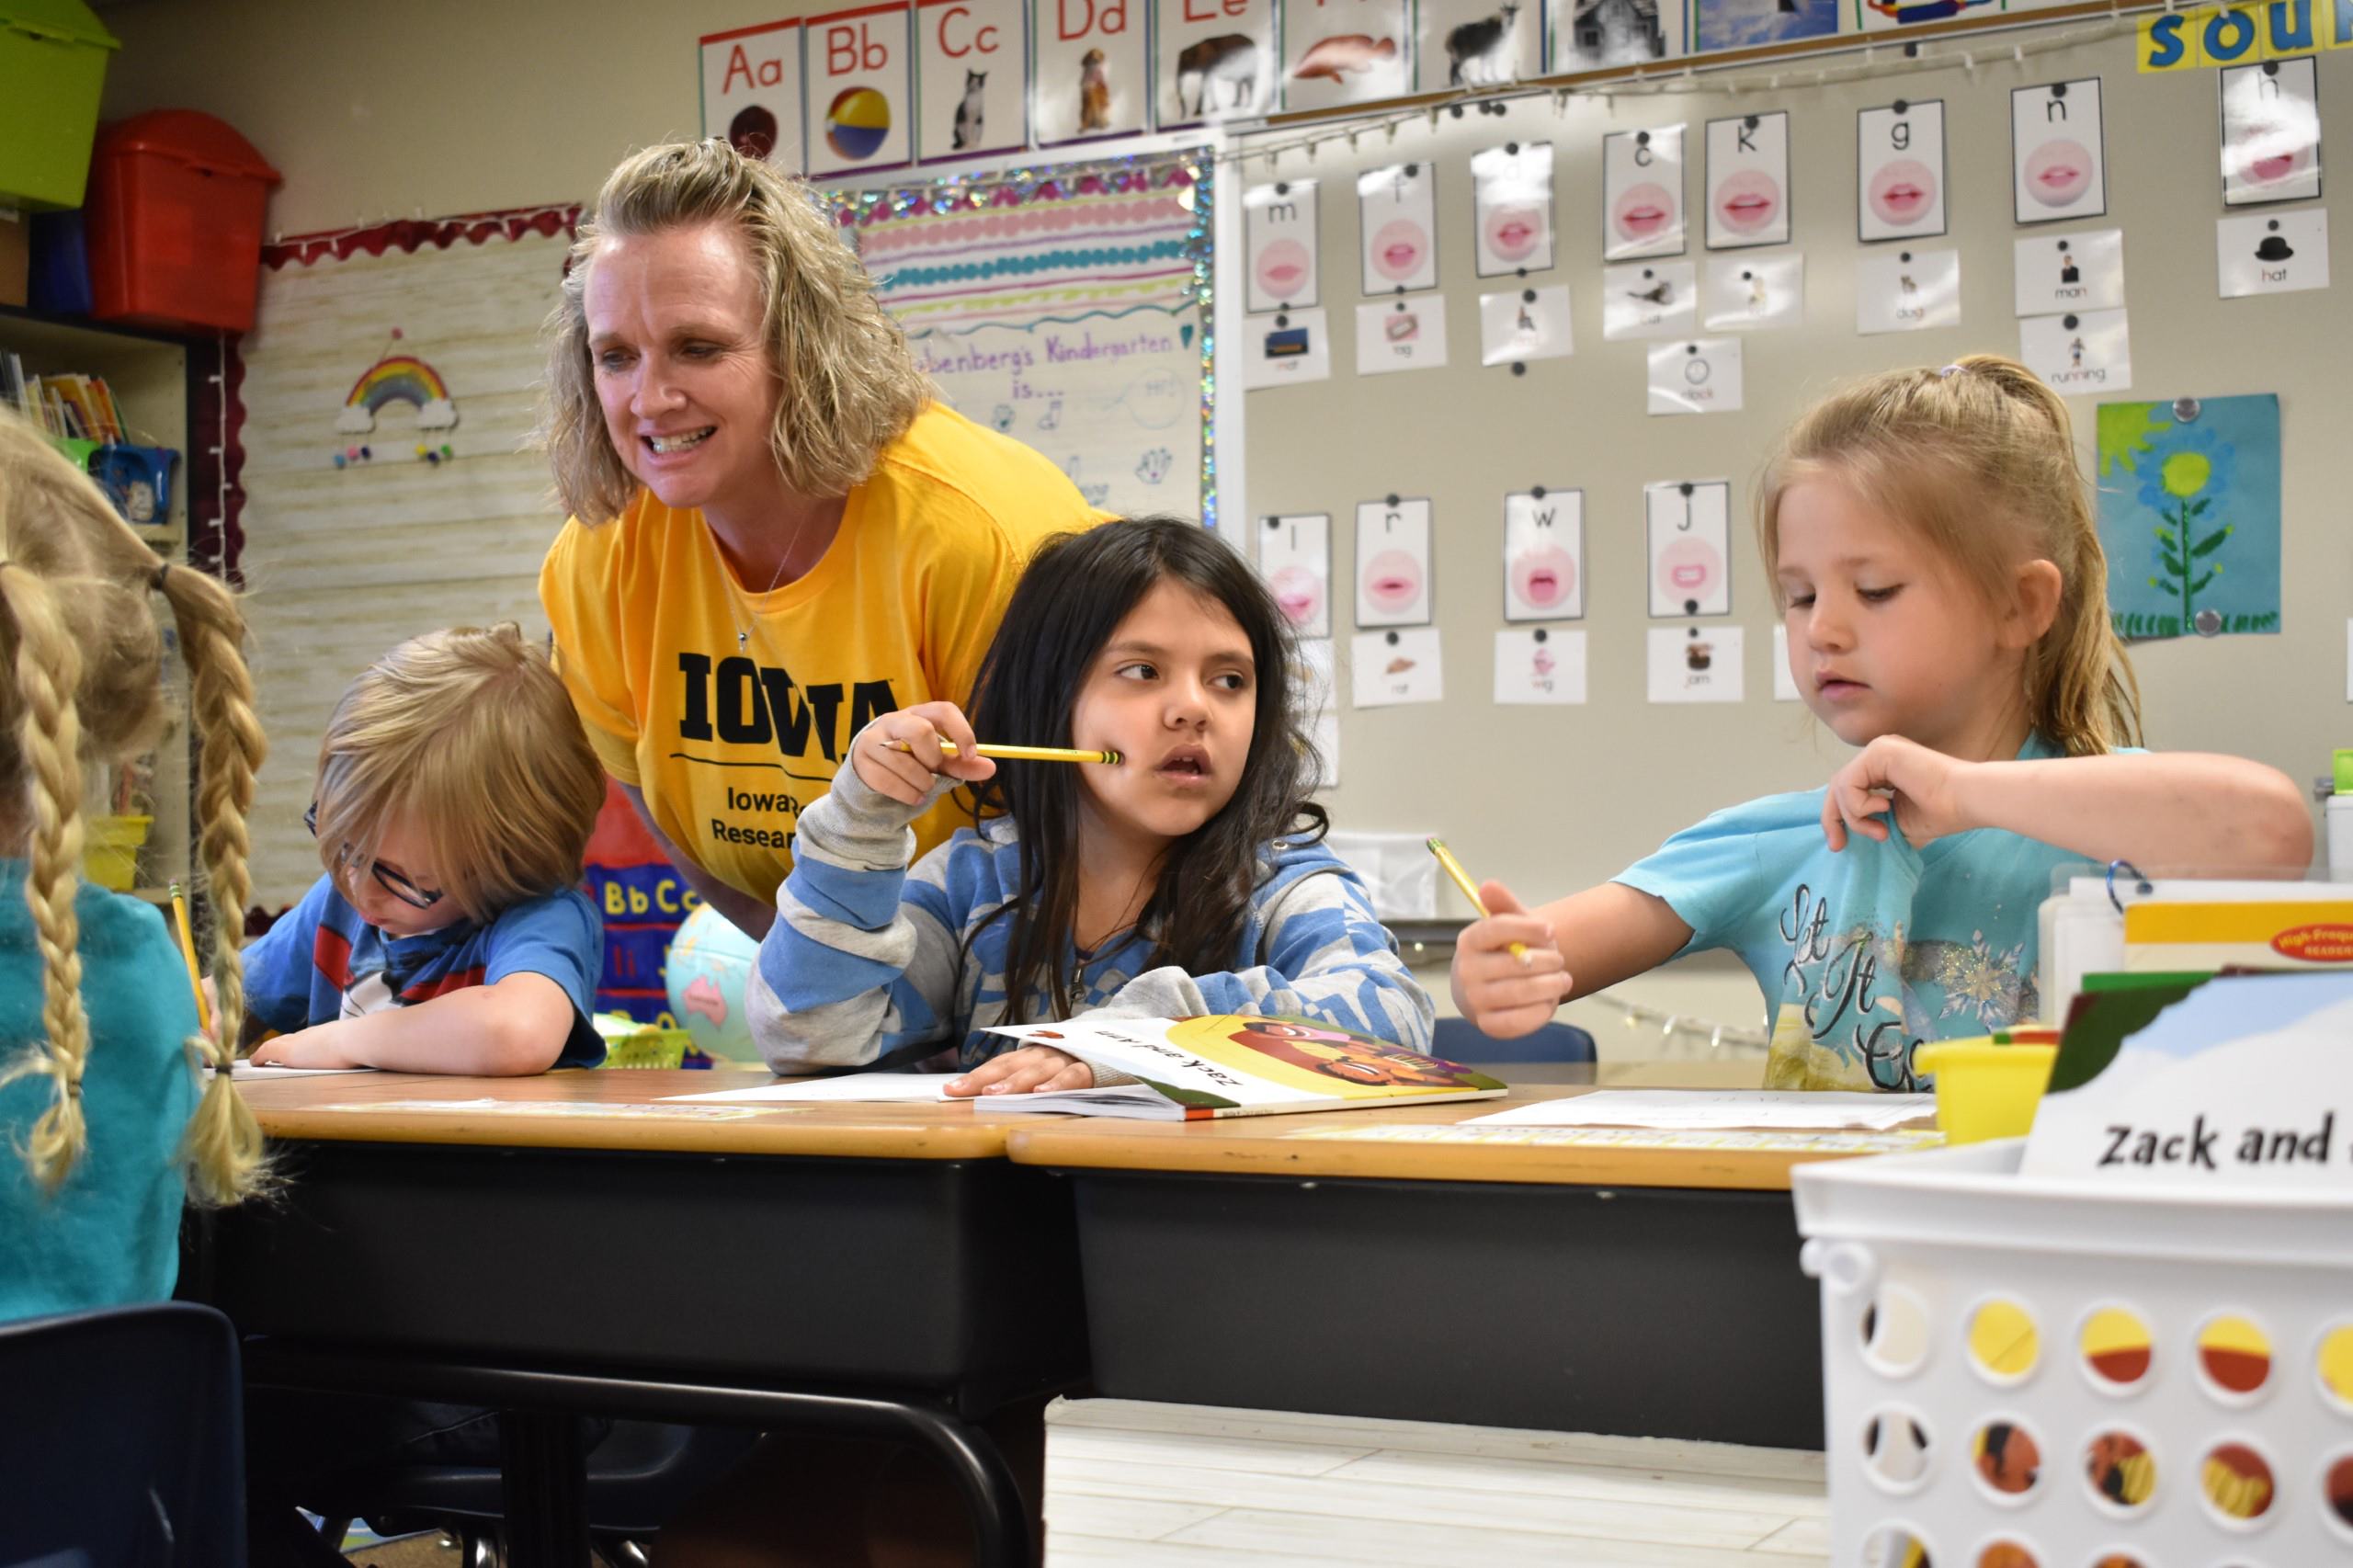 IRRC Assistant Director for Education and Outreach works with elementary students in a classroom